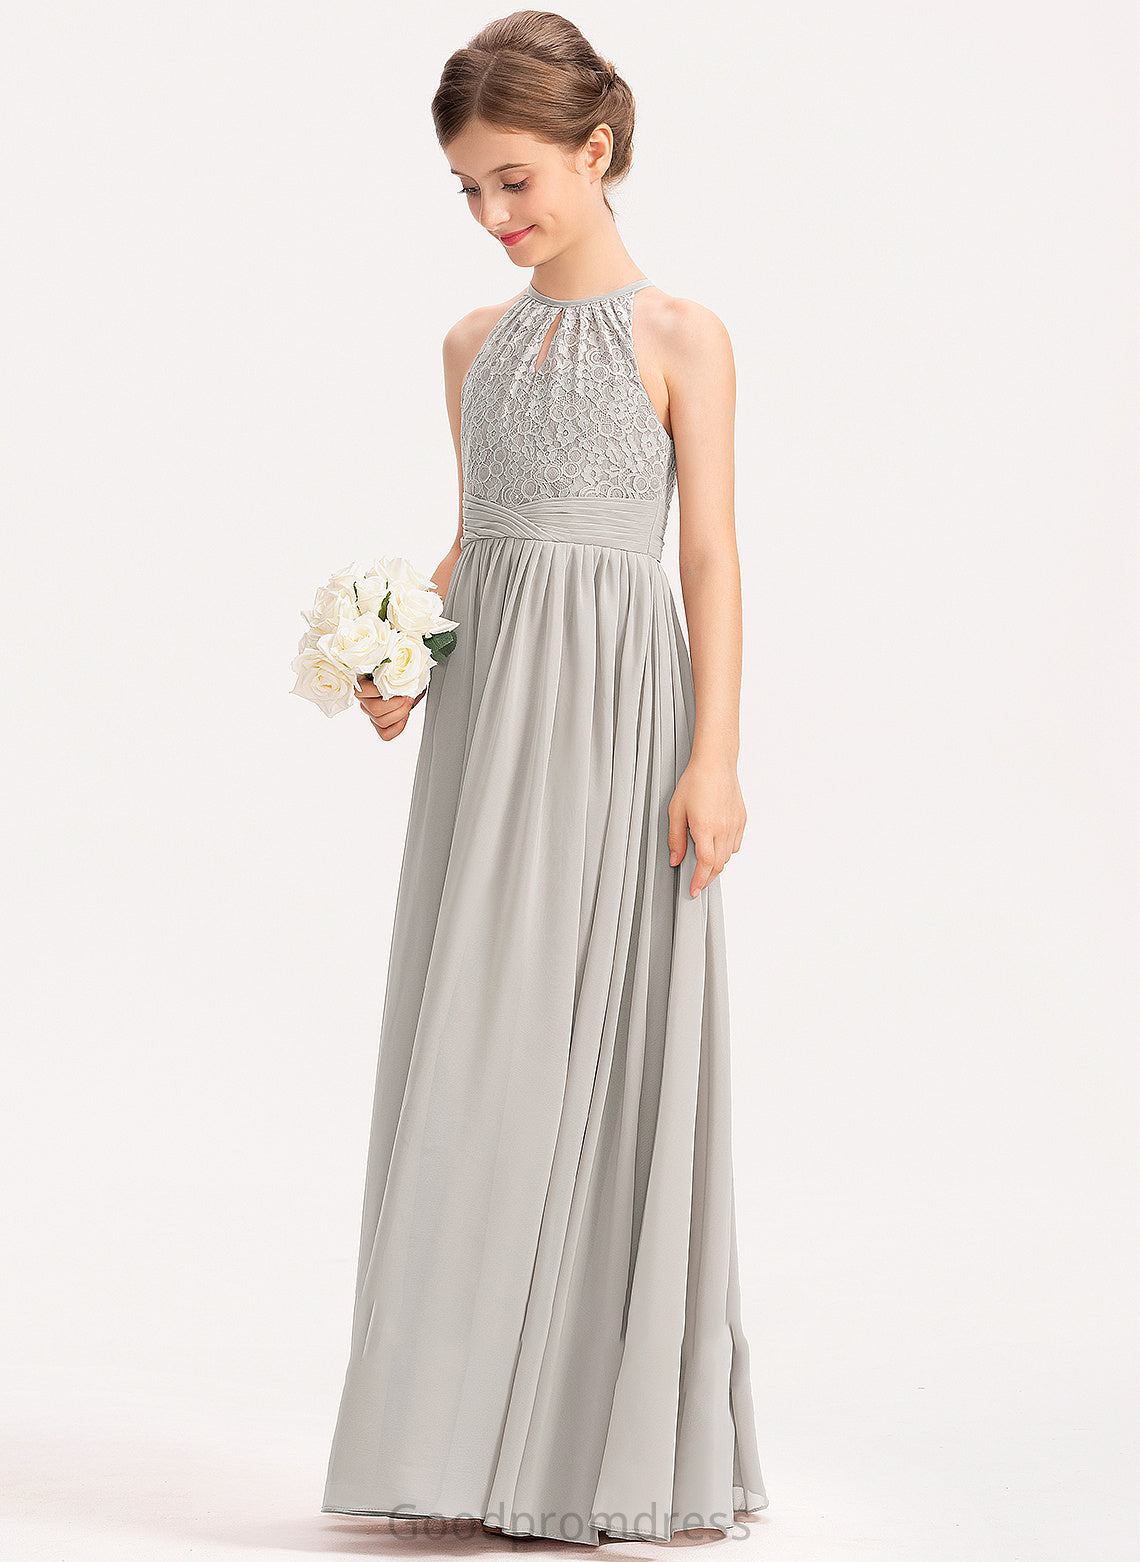 Scoop Abril A-Line Neck Junior Bridesmaid Dresses Lace With Chiffon Floor-Length Ruffle